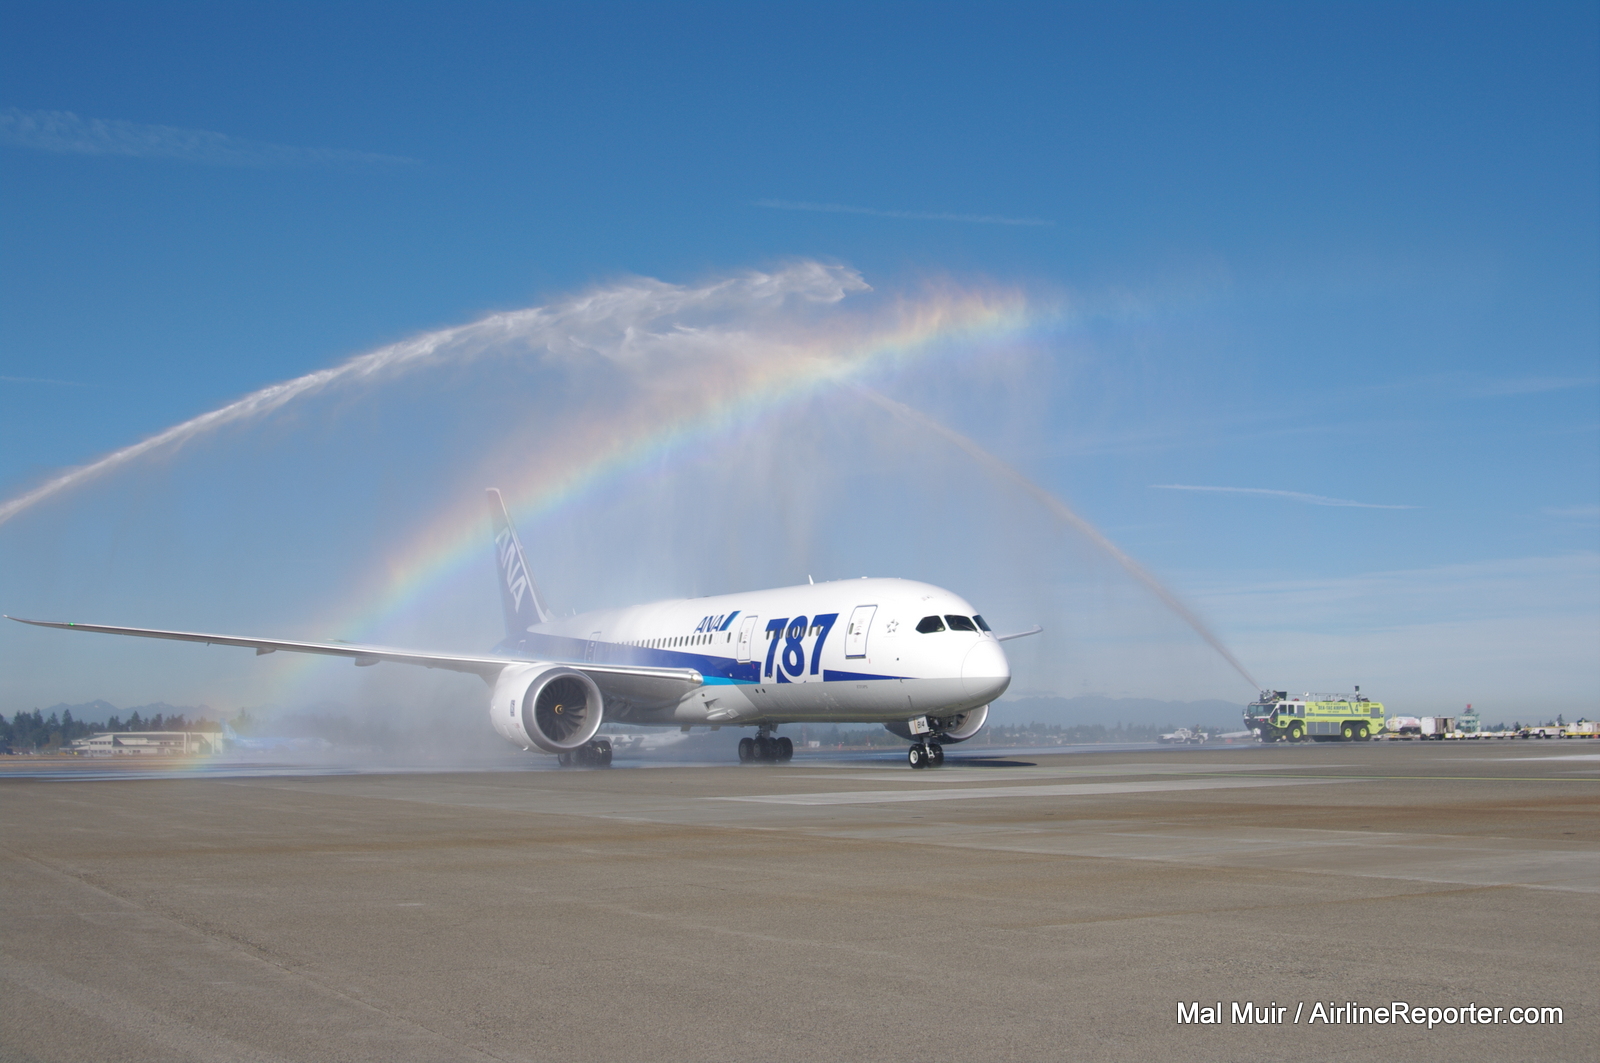 ANA's Boeing 787 arrives at SEA to a water cannon salute. Photo by Mal Muir / AirlineReporter.com.